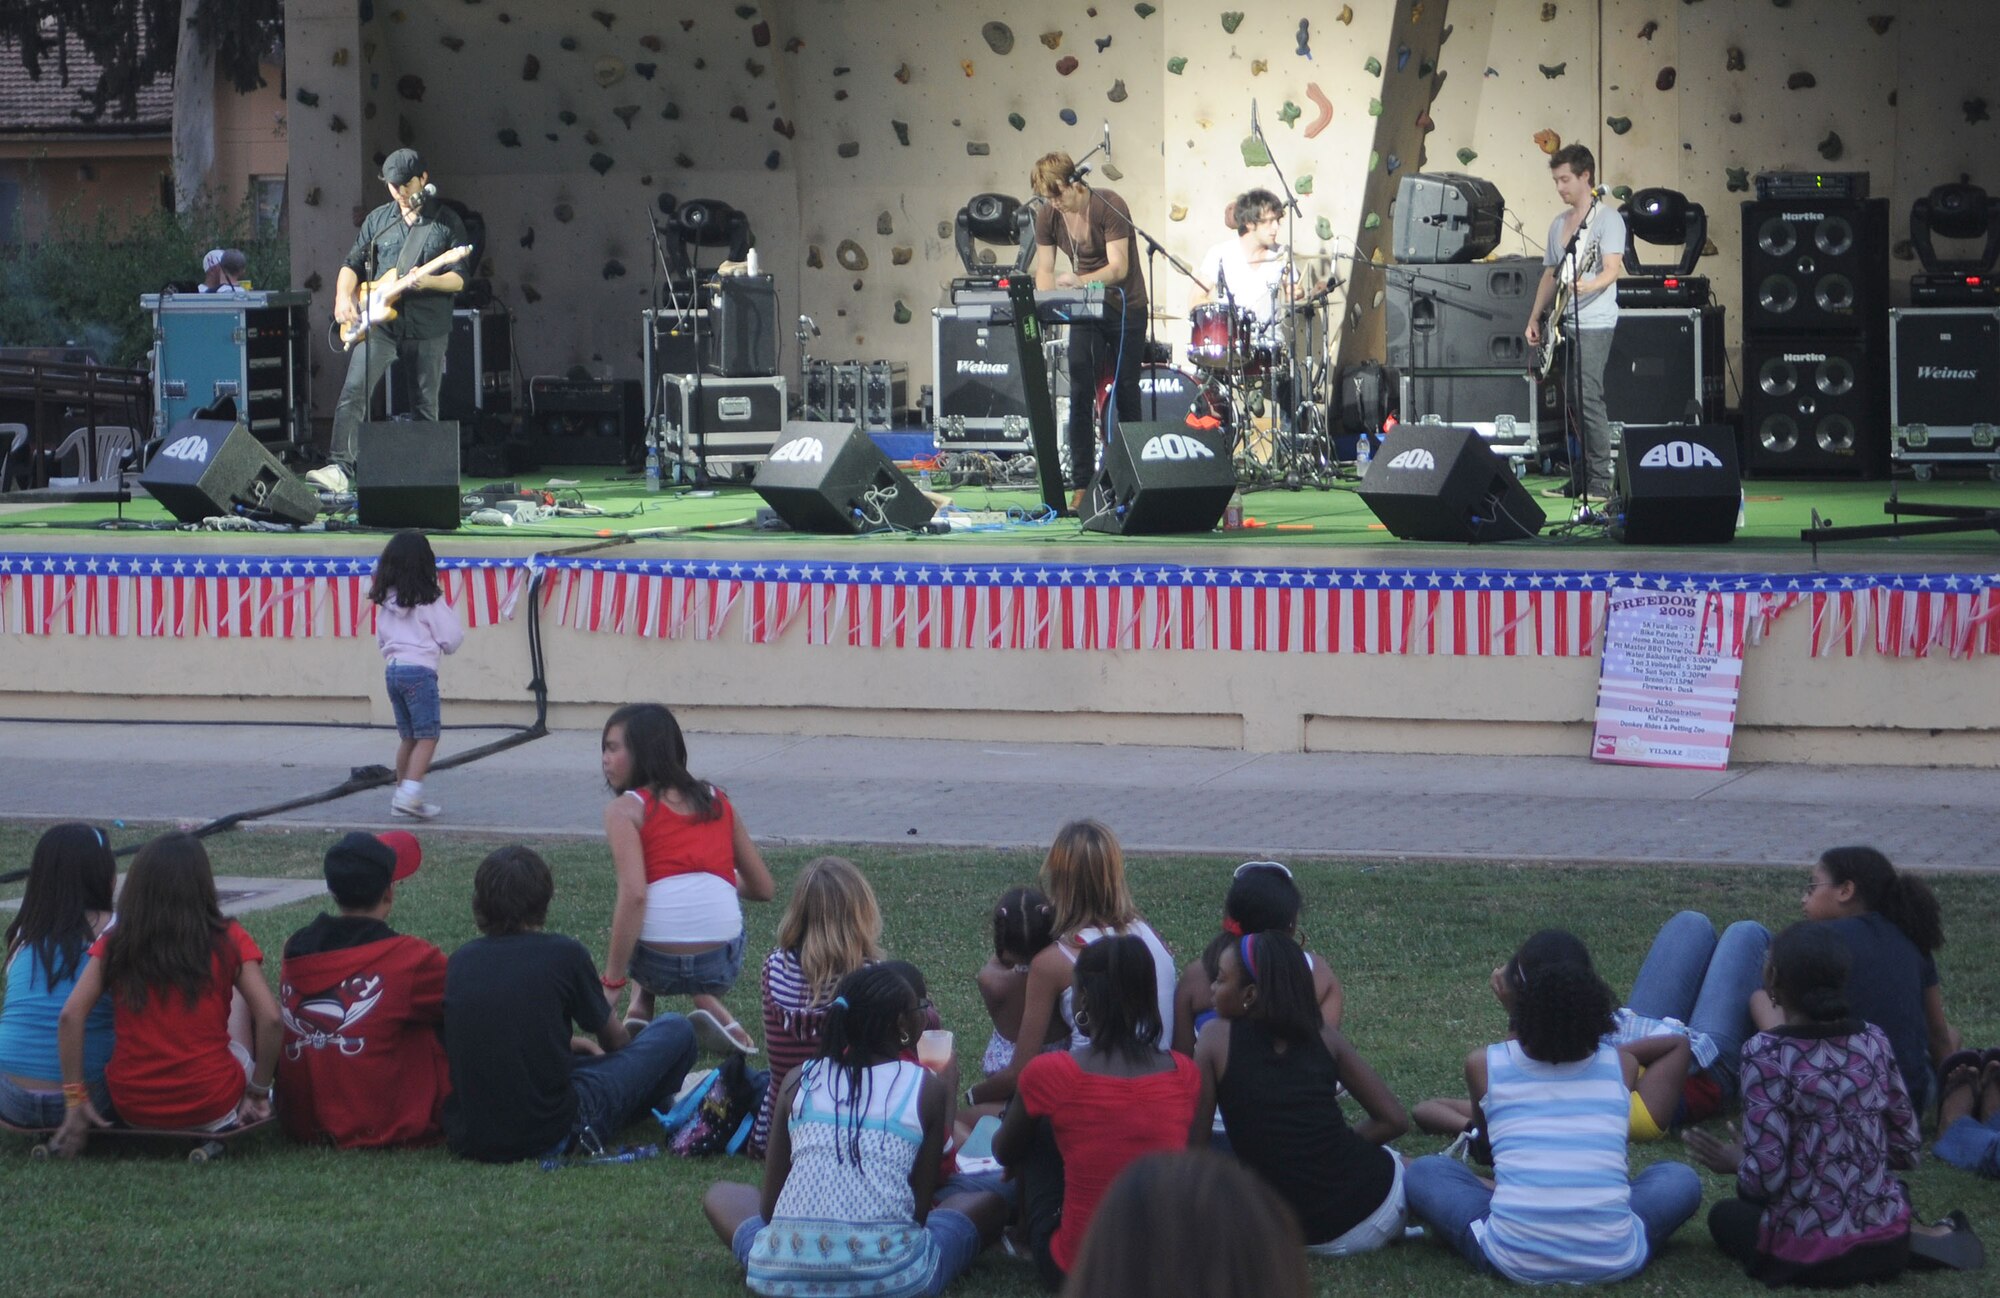 Rock band Brenn performs for hundreds of Freedom Fest goers Saturday, July 4, 2009 at Incirlik Air Base, Turkey. Brenn hails from Nashville, Tenn. Freedom Fest was the base’s official Fourth of July celebration and included events such as live bands, concession stands, arts and crafts, a petting zoo and a fireworks show. (U.S. Air Force photo/Senior Airman Alex Martinez)